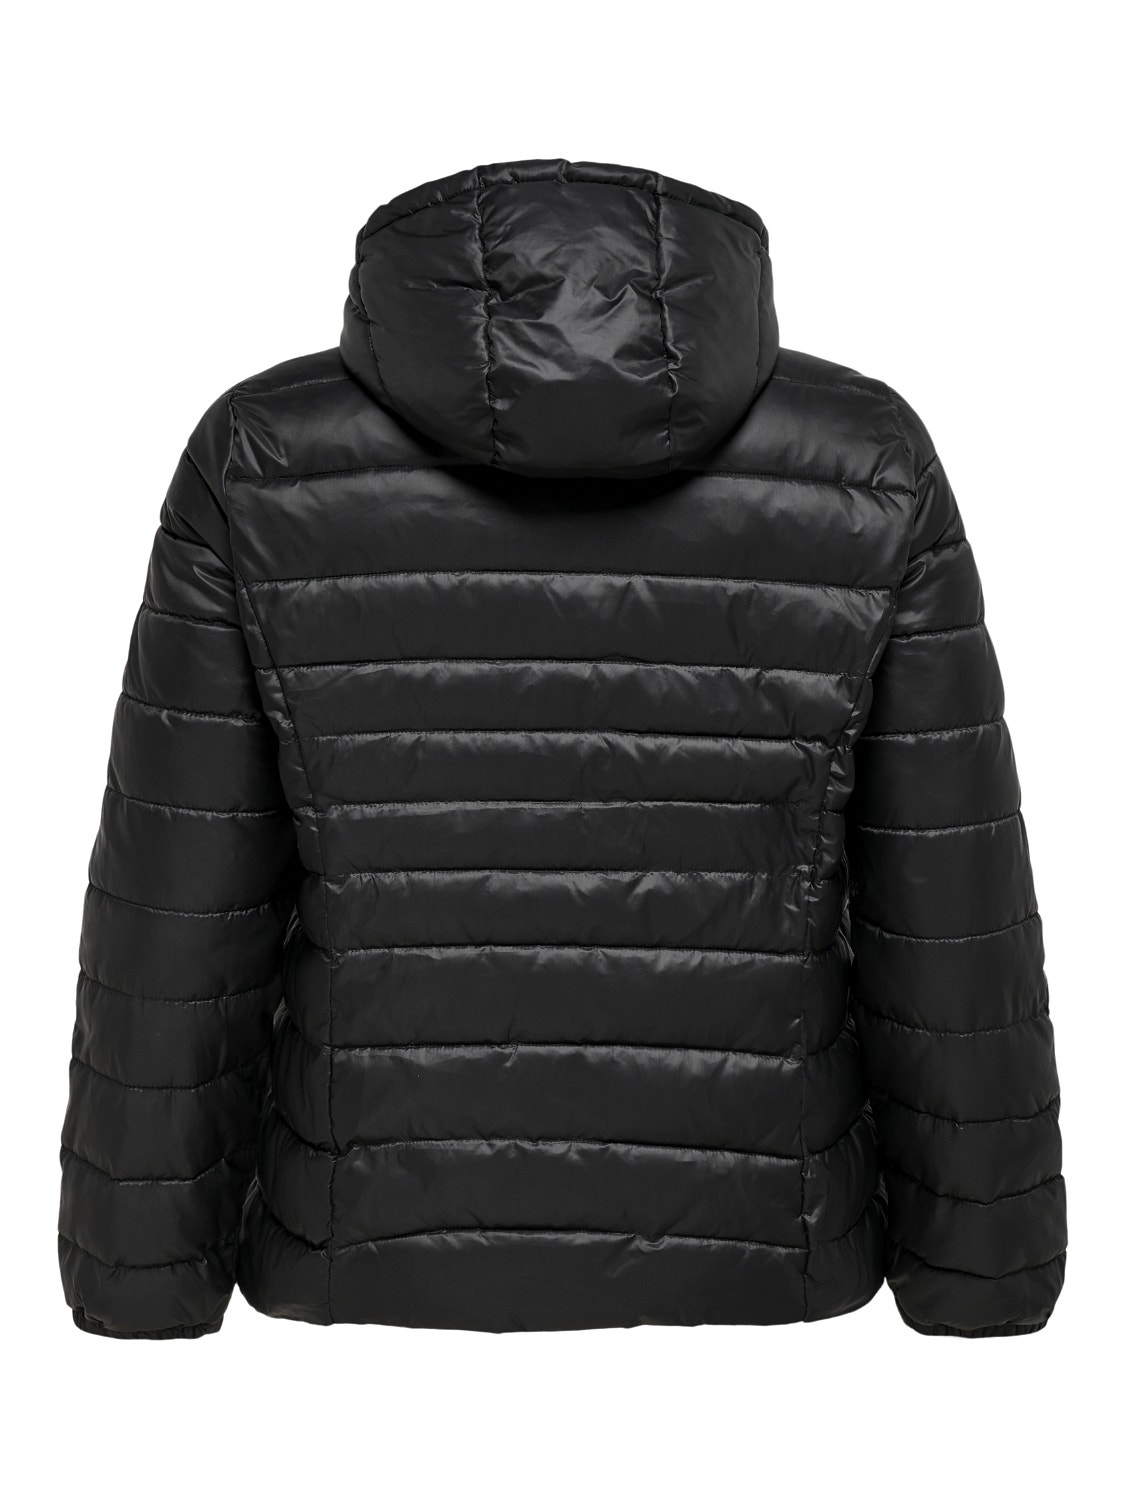 ONLY Curvy short Quilted jacket -Black - 15206086